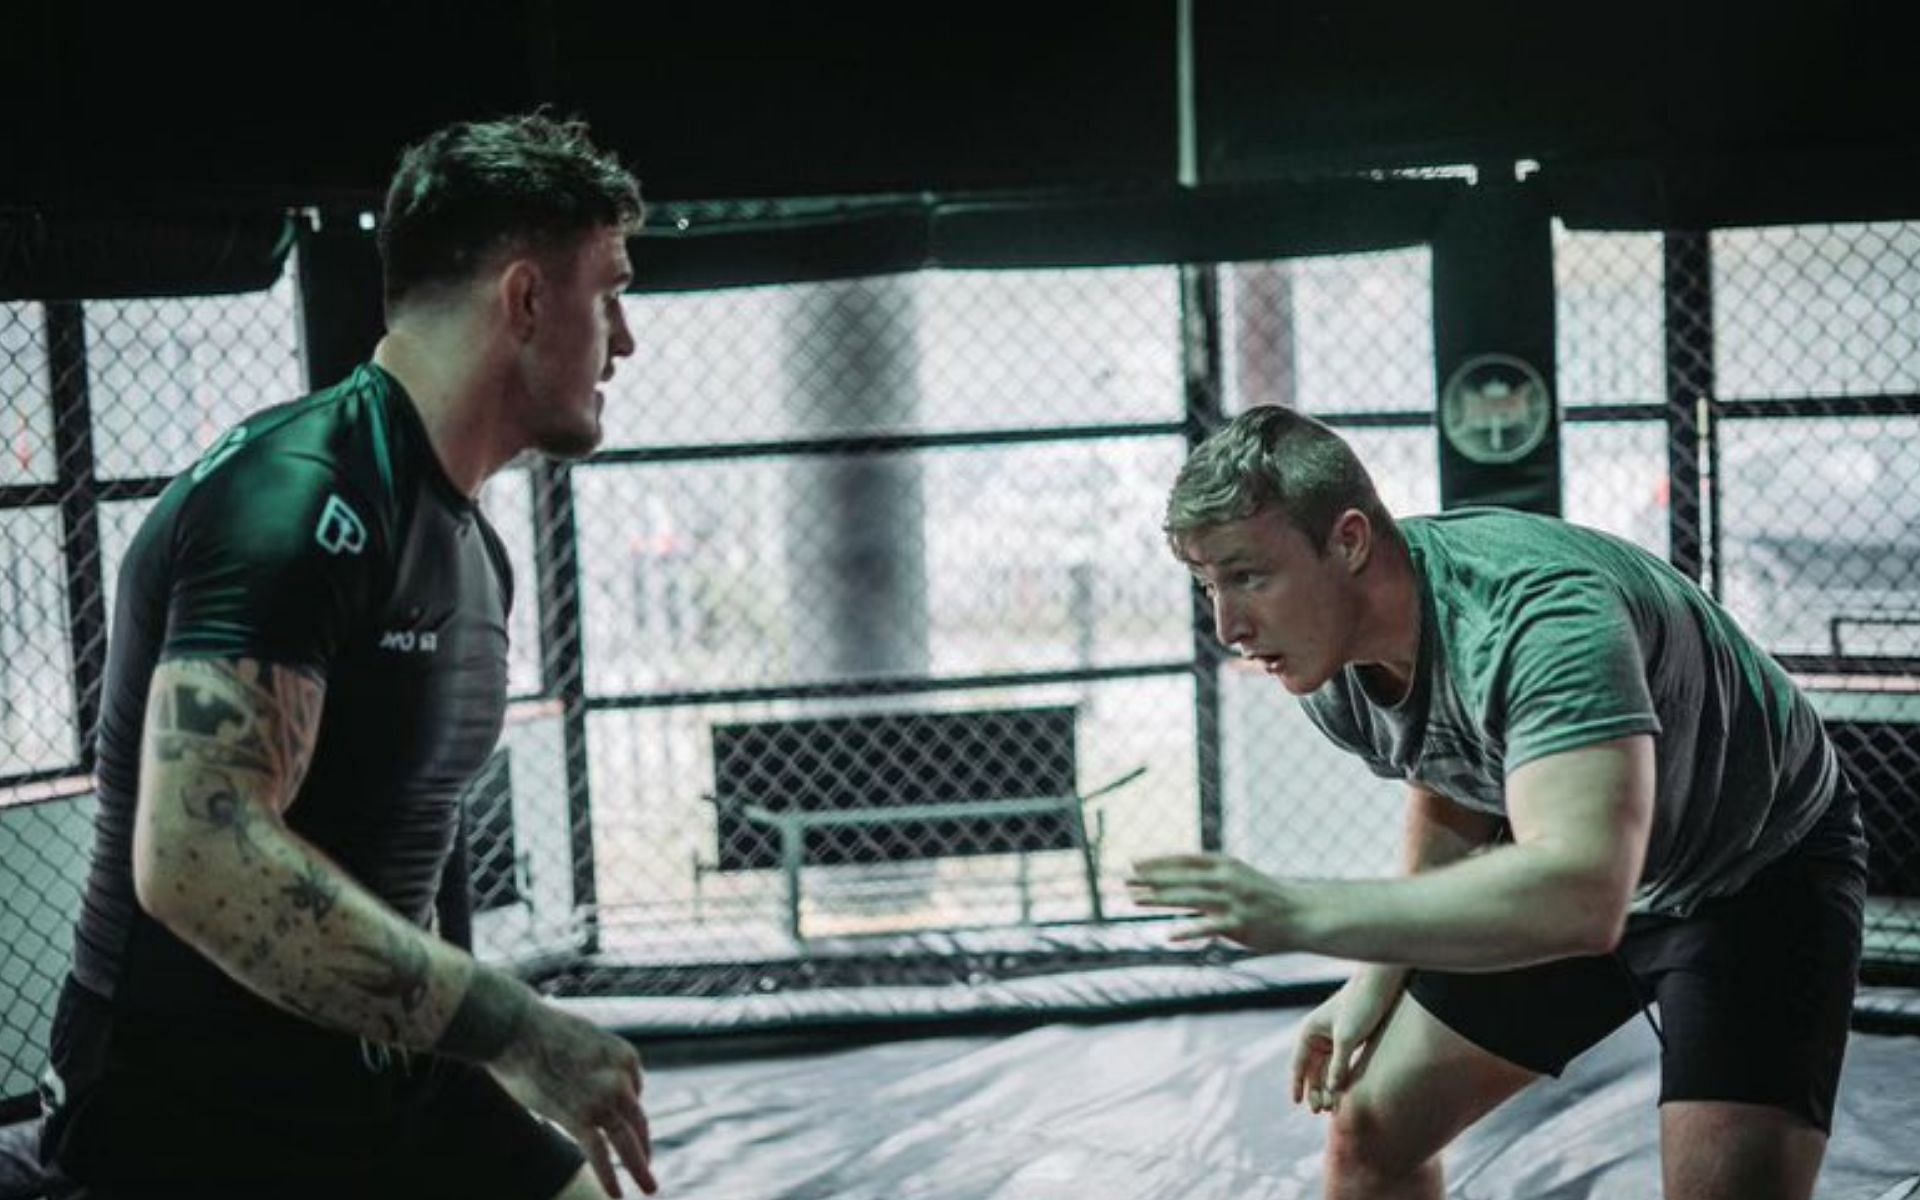 Callum Bisping (Right), son of Michael Bisping (Image courtesy of @calpolkidSF Twitter)